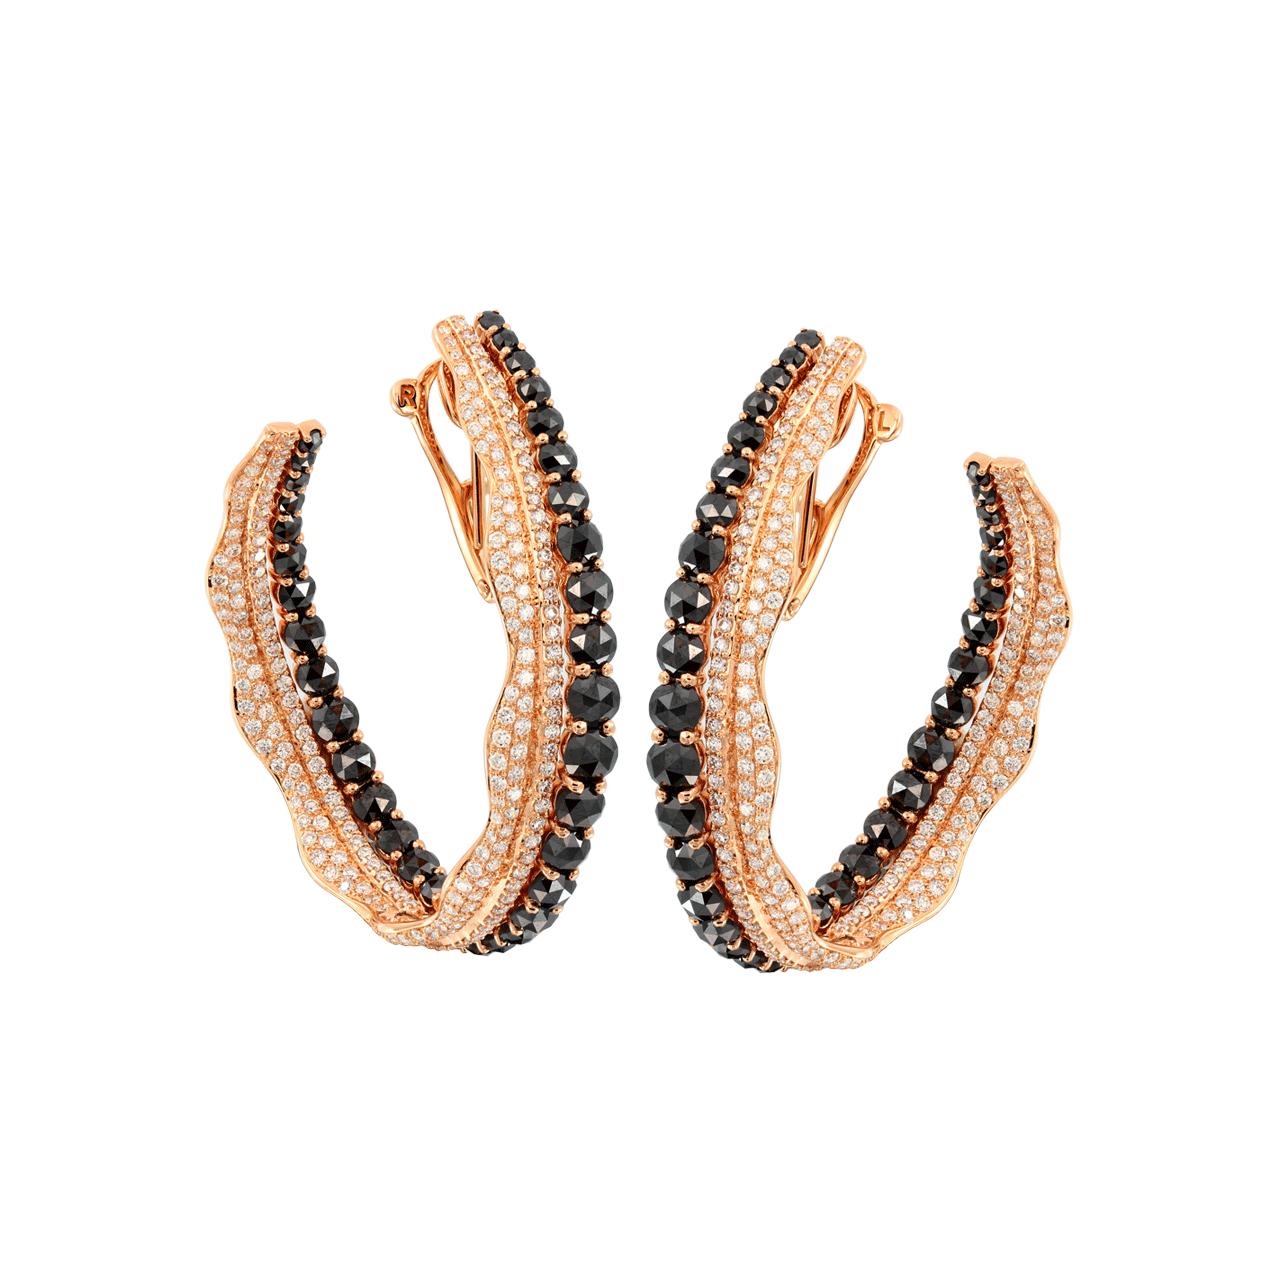 Dramatic wavy hoop earrings handcrafted in 18k rose gold, featuring one row of rose cut black diamonds that total 6.78 carats. There are two rows of pave diamonds 2.90 carats.